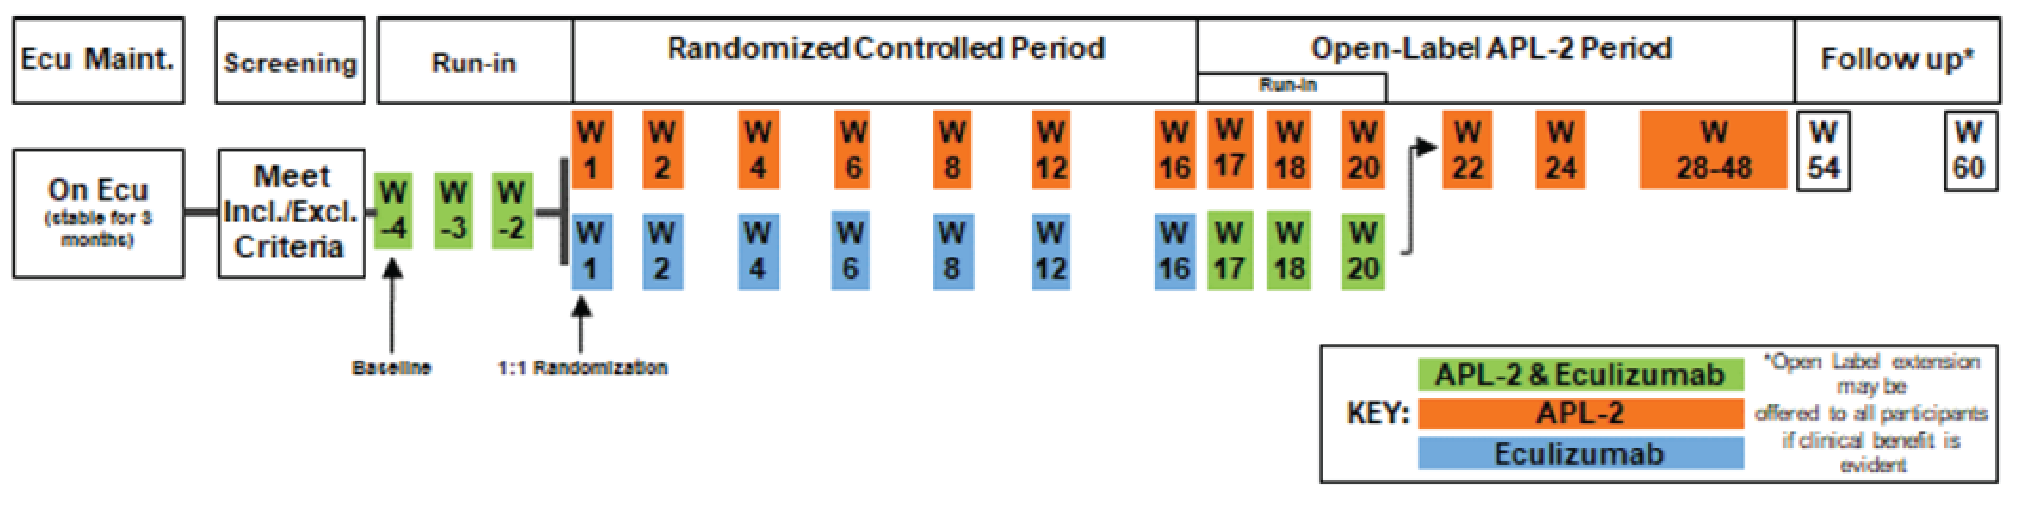 The study consisted of 5 periods: screening, run-in, randomized controlled, open-label pegcetacoplan, and follow-up. After the screening period, patients entered the run-in period, during which eculizumab and pegcetacoplan were given concurrently for 4 weeks. This was followed by the randomized controlled period, during which patients were randomized to receive either pegcetacoplan or eculizumab monotherapy for 16 weeks. Patients then entered the open-label pegcetacoplan period for 32 weeks, receiving pegcetacoplan monotherapy only. Patients who transitioned from the eculizumab arm first underwent a run-in period with the concurrent use of eculizumab and pegcetacoplan for 4 weeks before reciving pegcetacoplan only for the remainder of the open-label pegcetacoplan period. Patients then either entered the 12-week follow-up period or were enrolled into an open-label extension study.